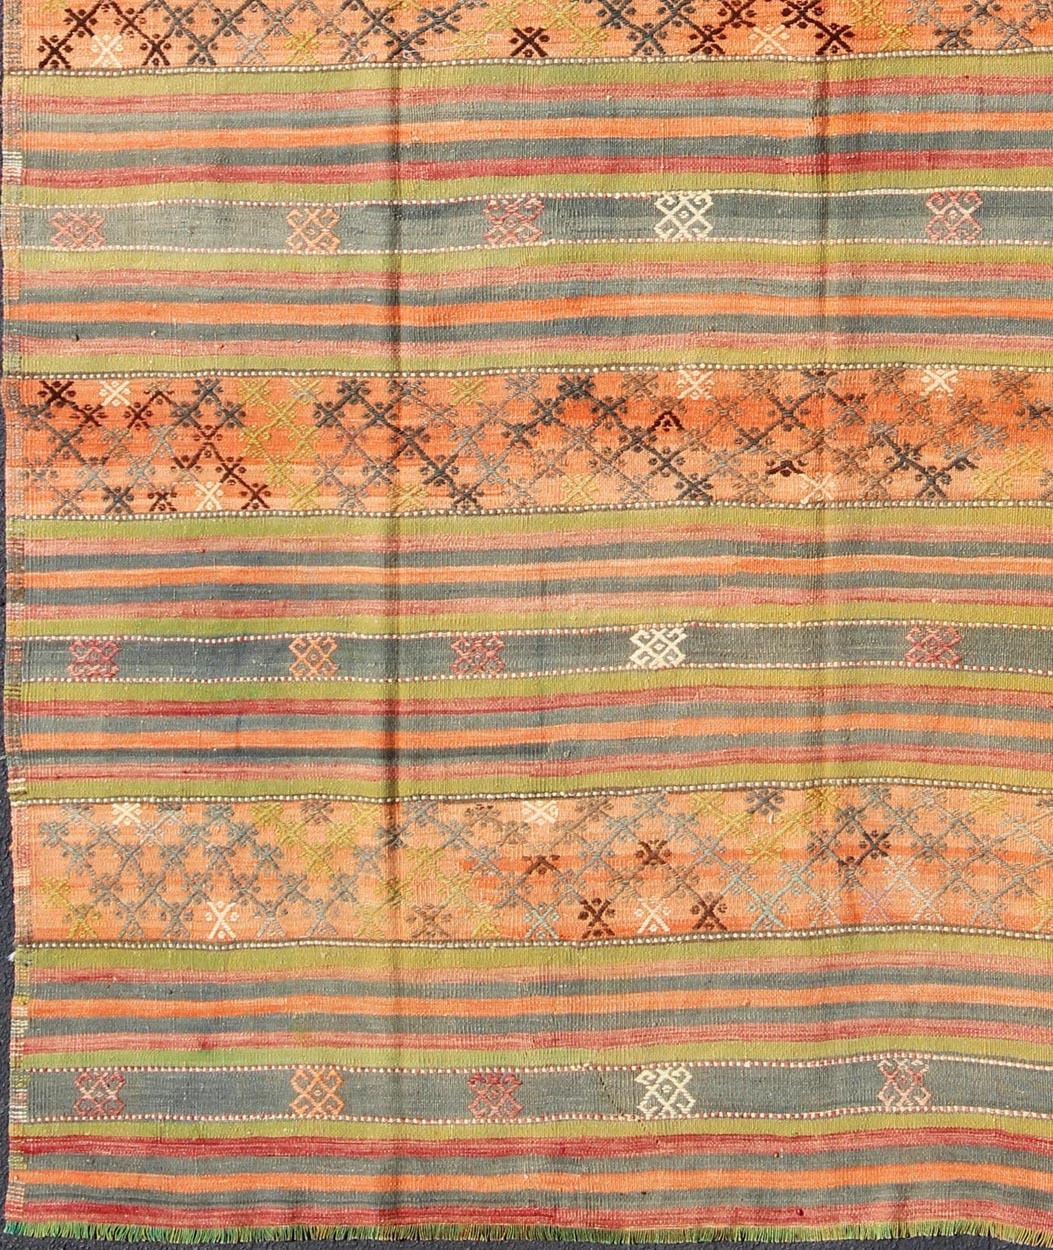 Geometric stripe design Kilim in multi-colors, rug tu-ned-25, country of origin / type: Turkey / Kilim, circa 1950

This vintage Kilim displays an array of designs, including a striped pattern and small geometric prints. The designs are rendered in